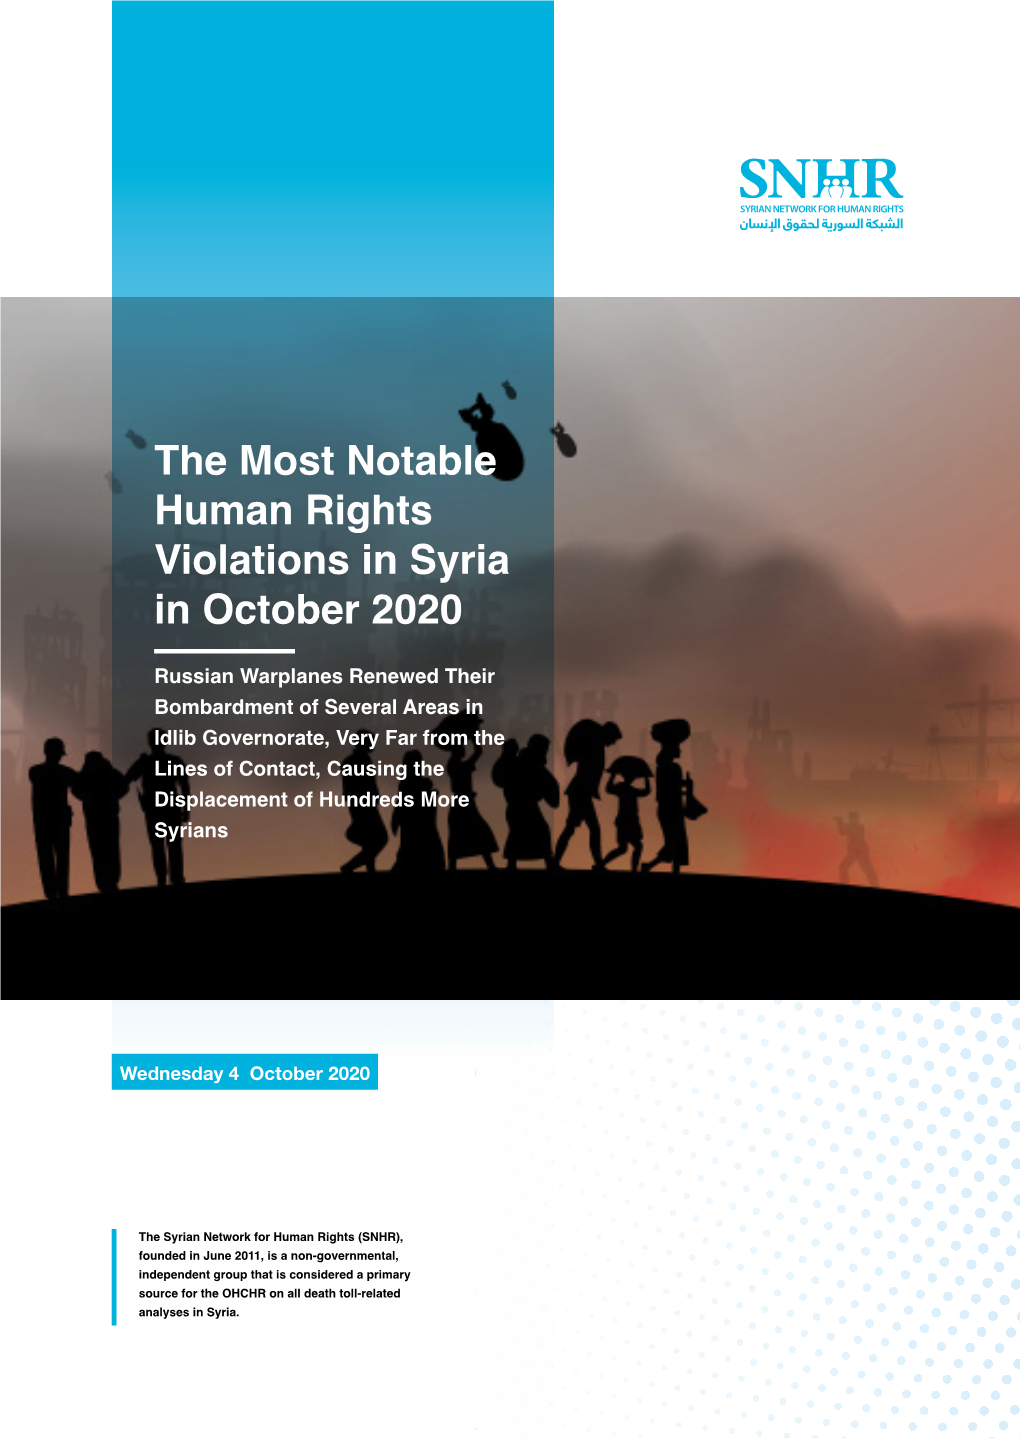 The Most Notable Human Rights Violations in Syria in October 2020